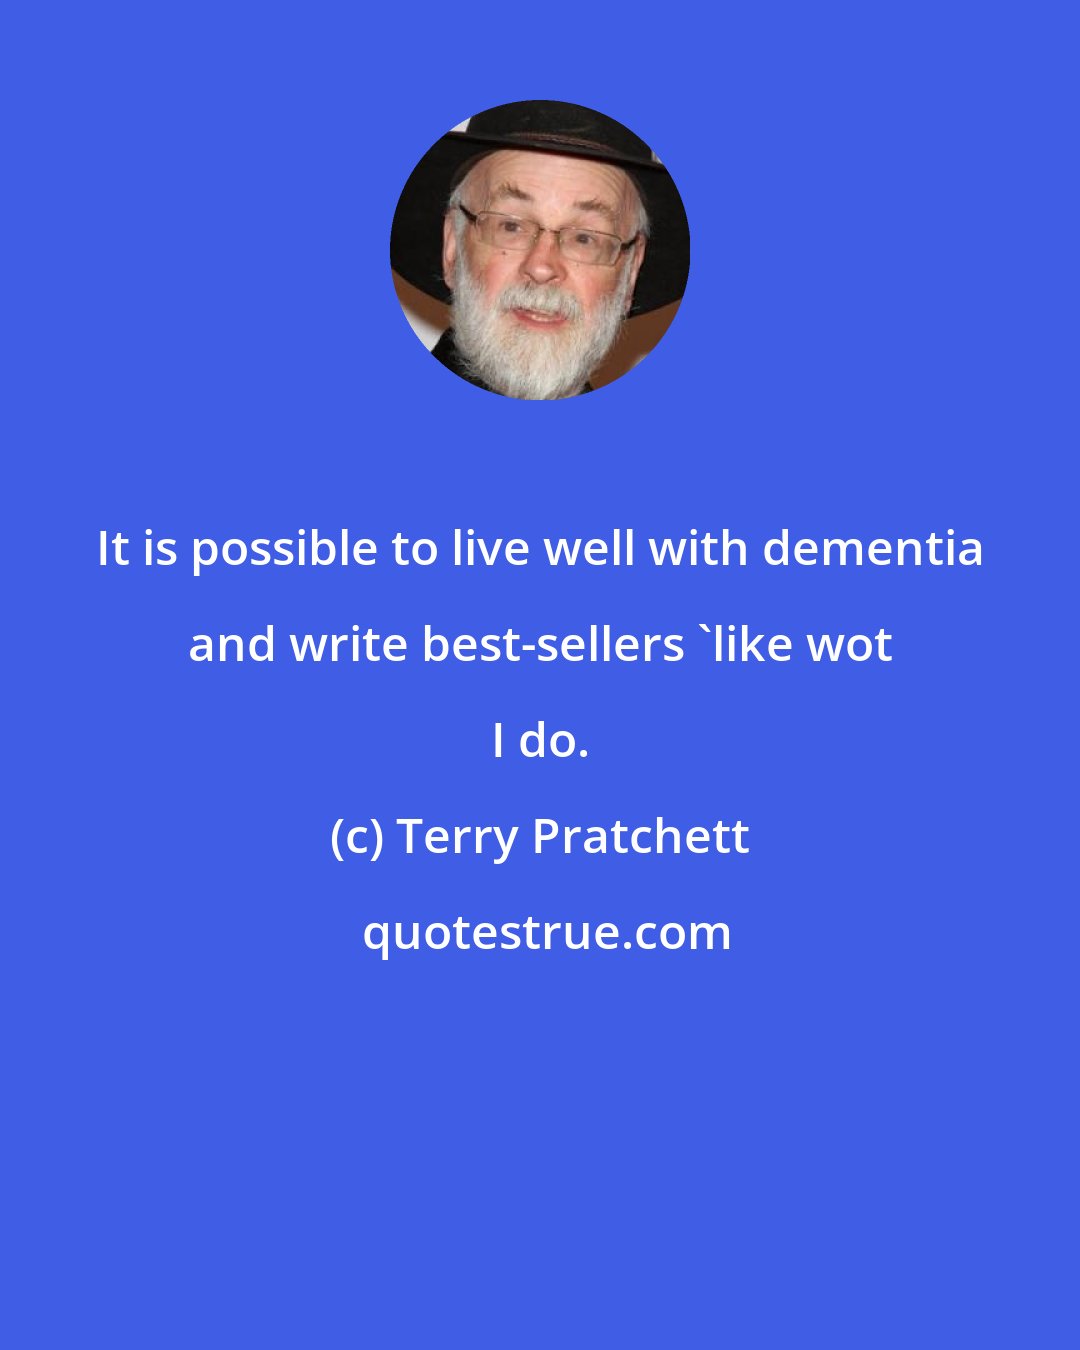 Terry Pratchett: It is possible to live well with dementia and write best-sellers 'like wot I do.